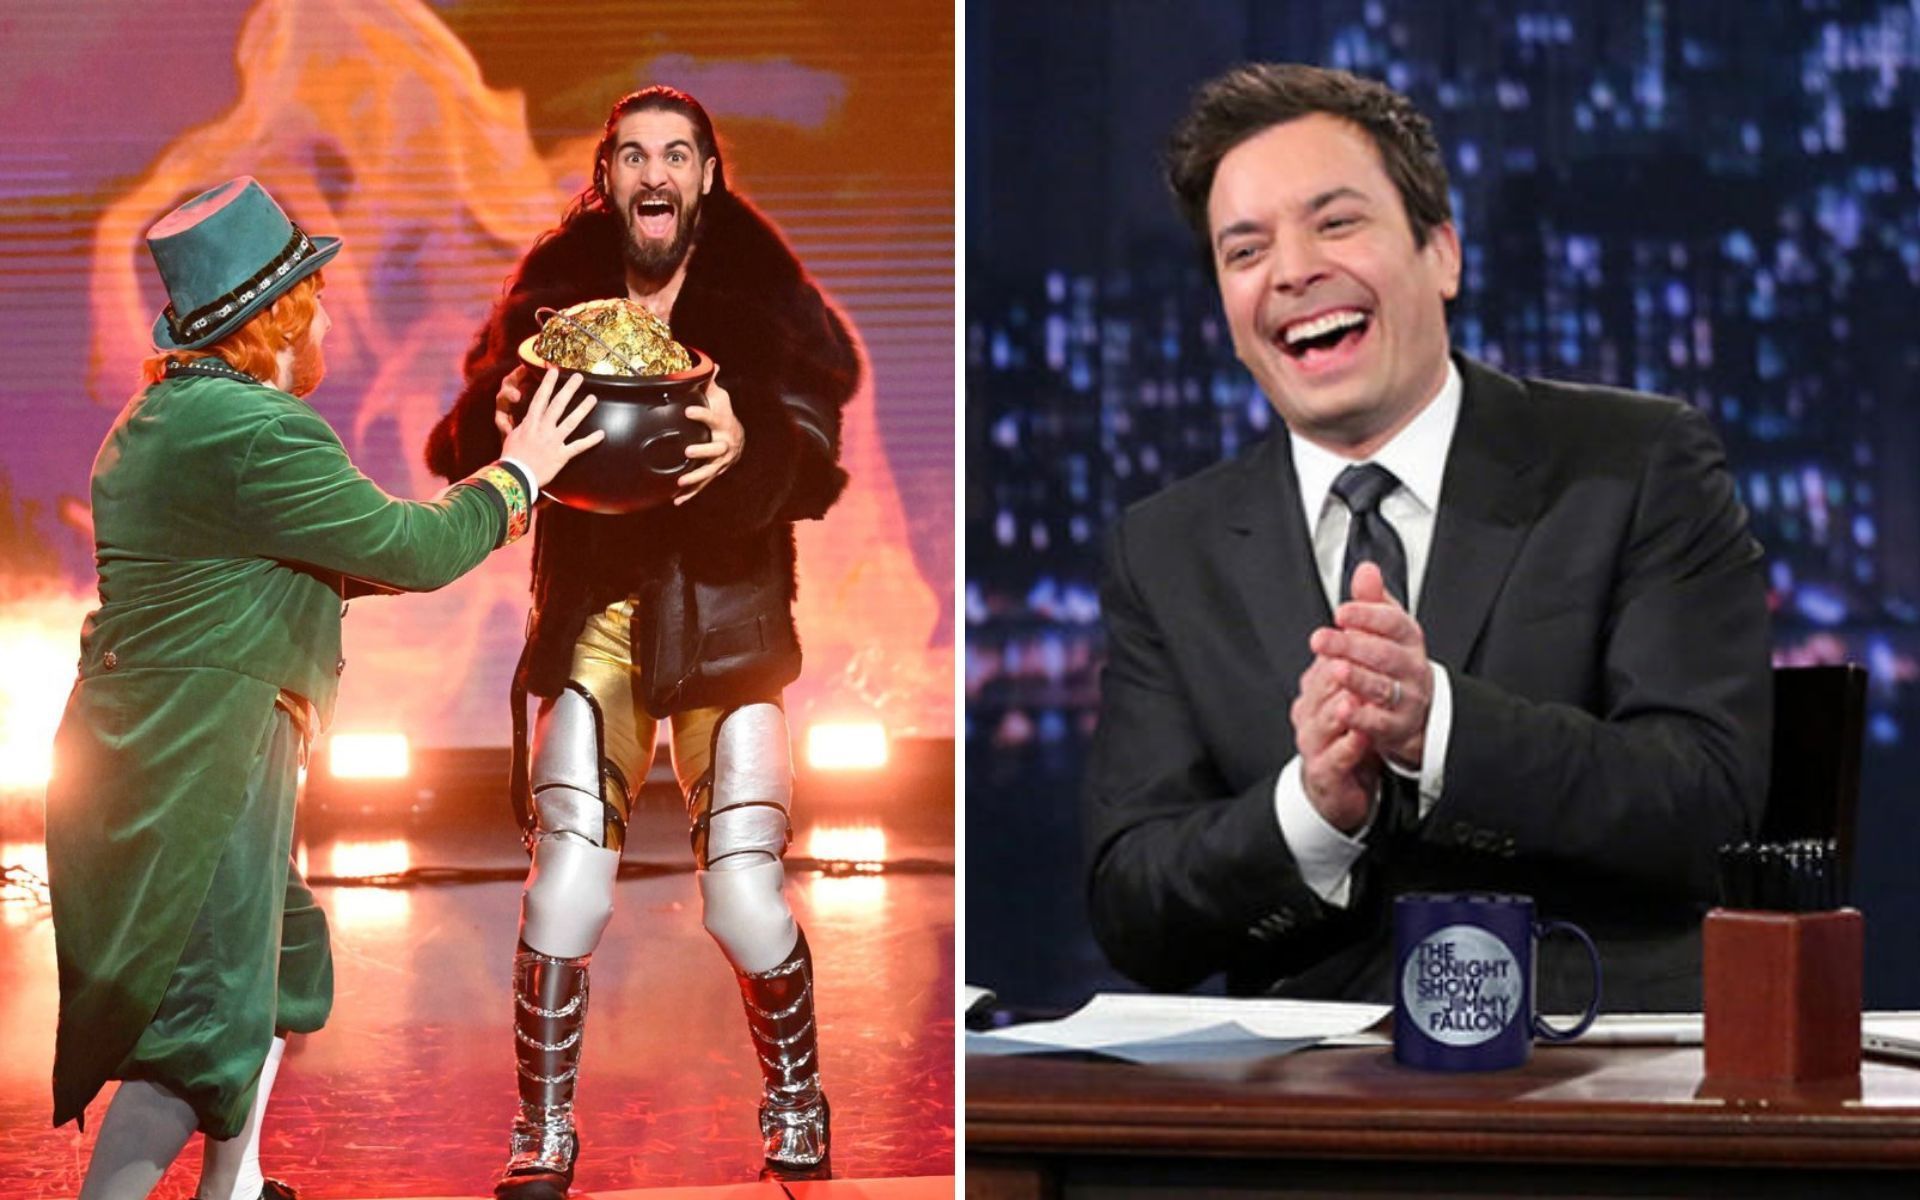 Seth Rollins represented WWE on The Tonight Show Starring Jimmy Fallon.